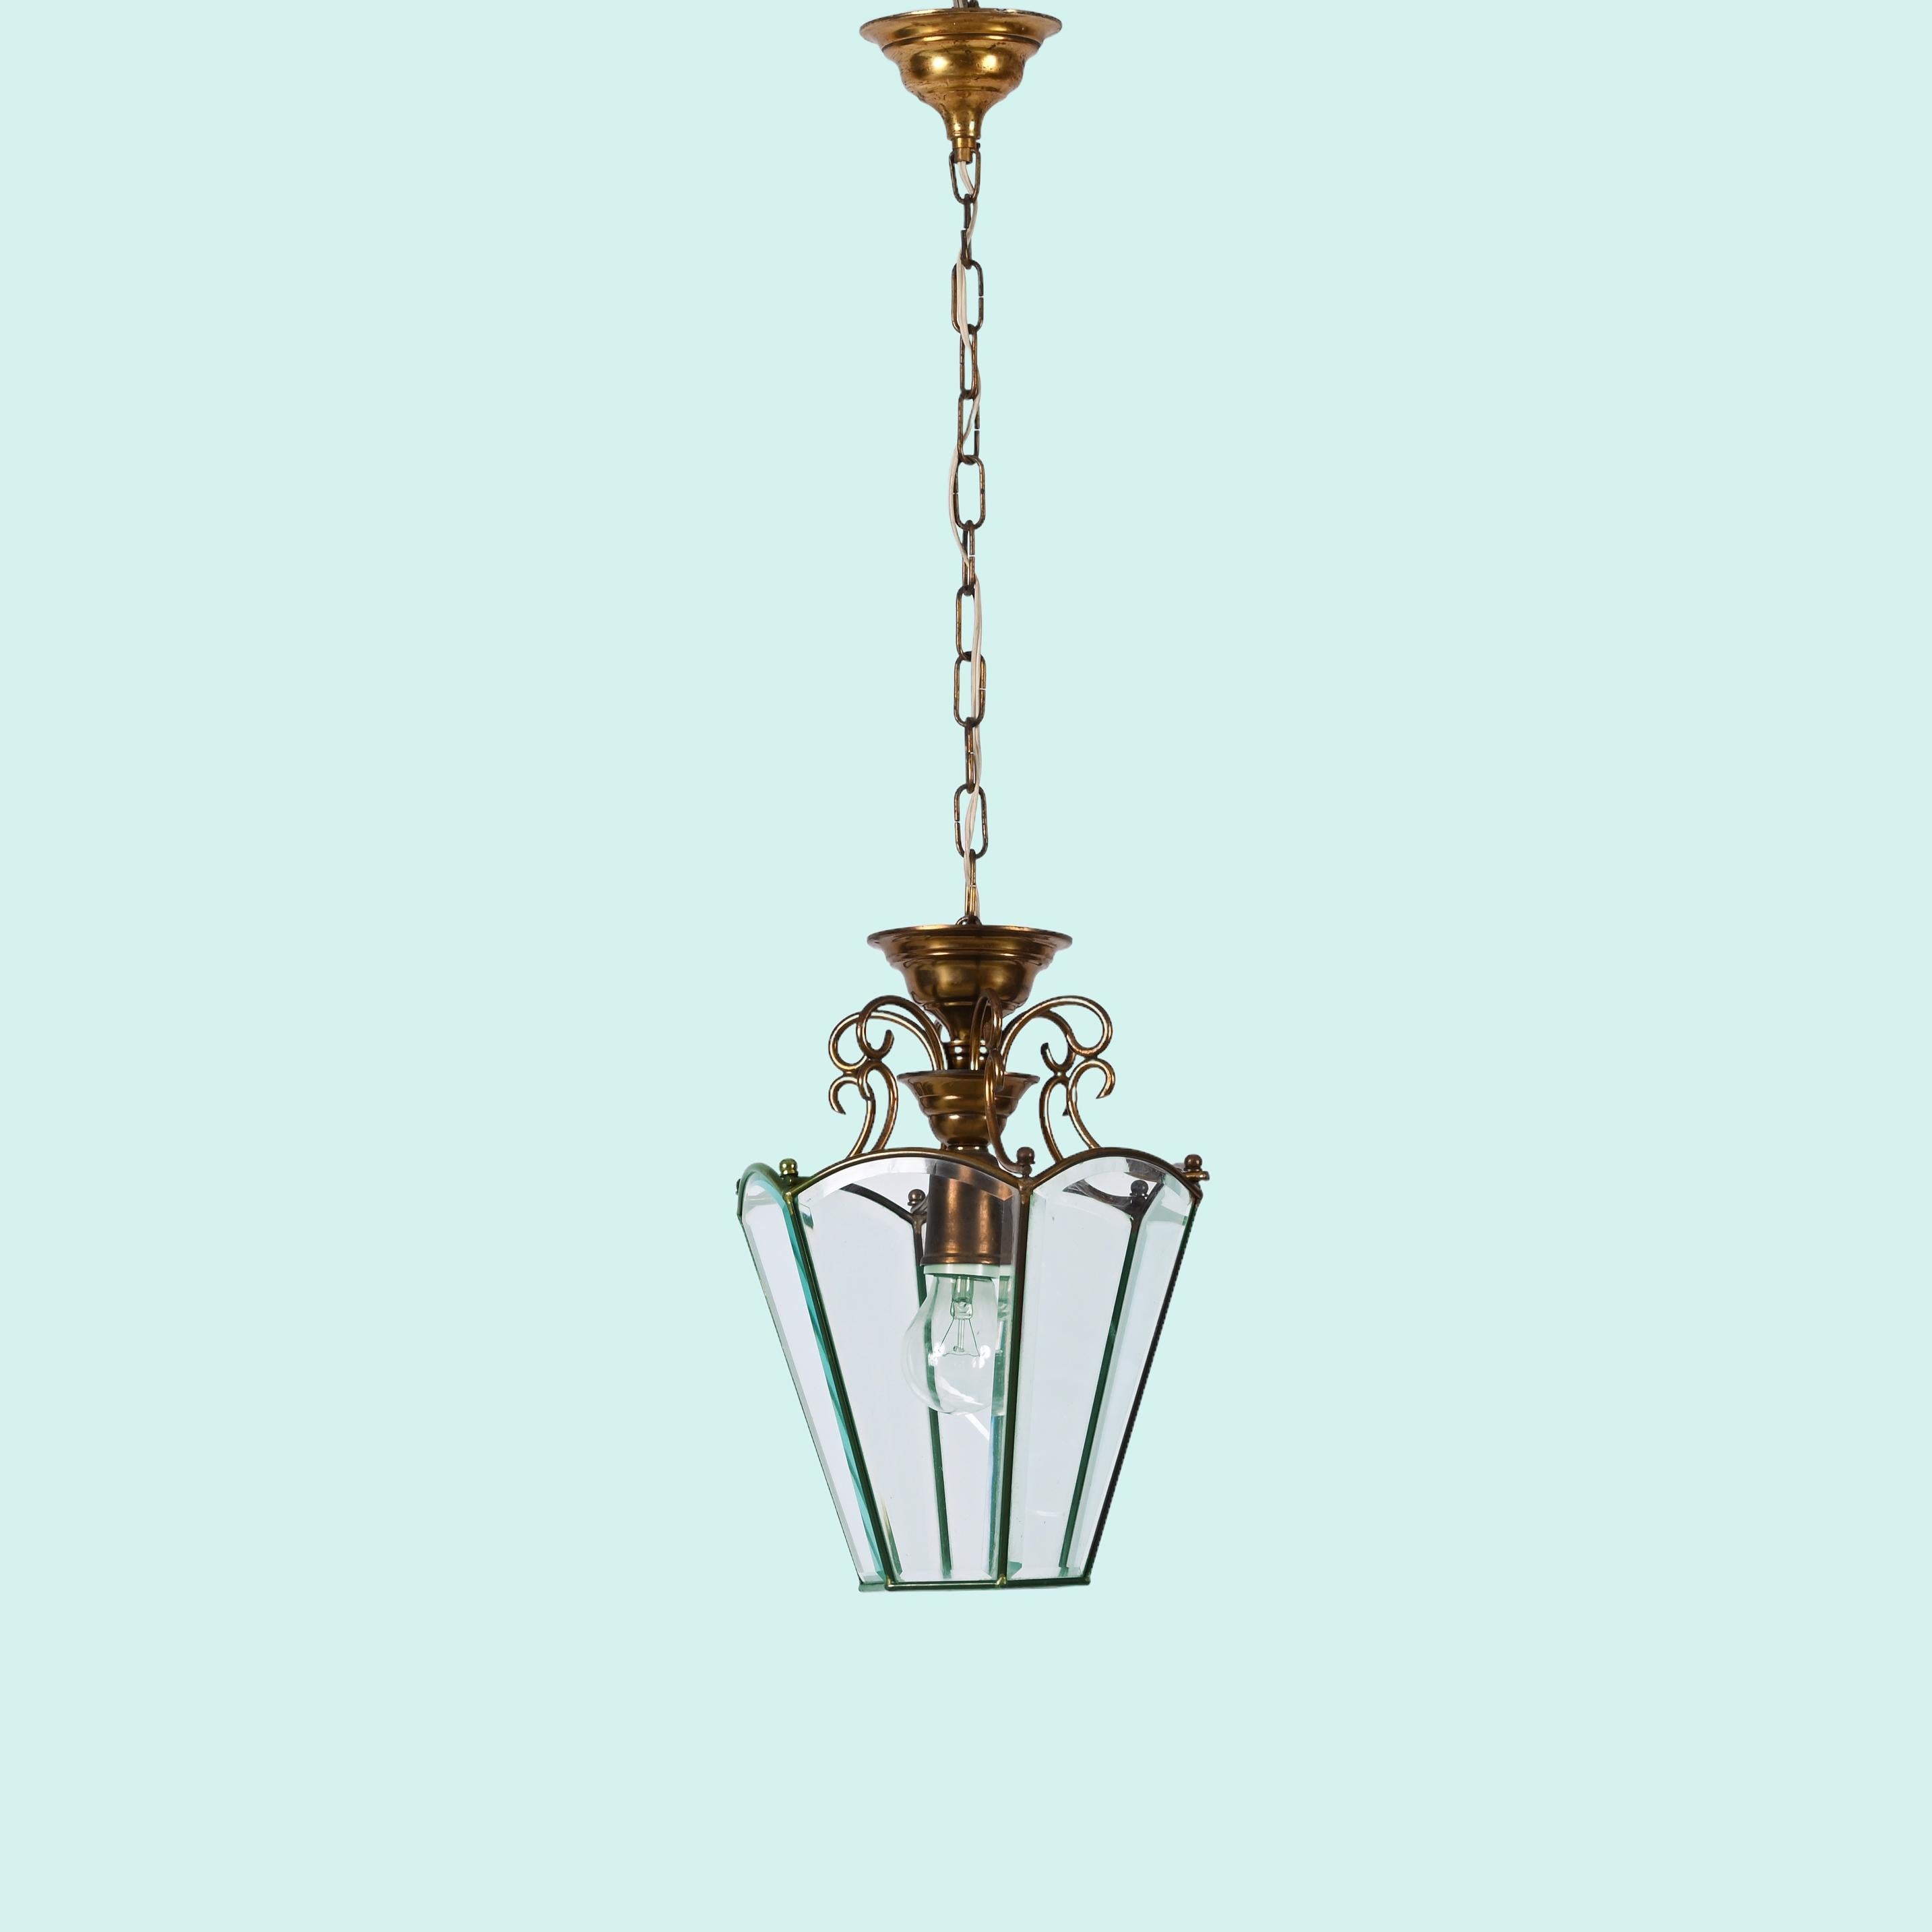 Brass and Beveled Glass Hexagonal Italian Chandelier After Adolf Loos, 1950s For Sale 7